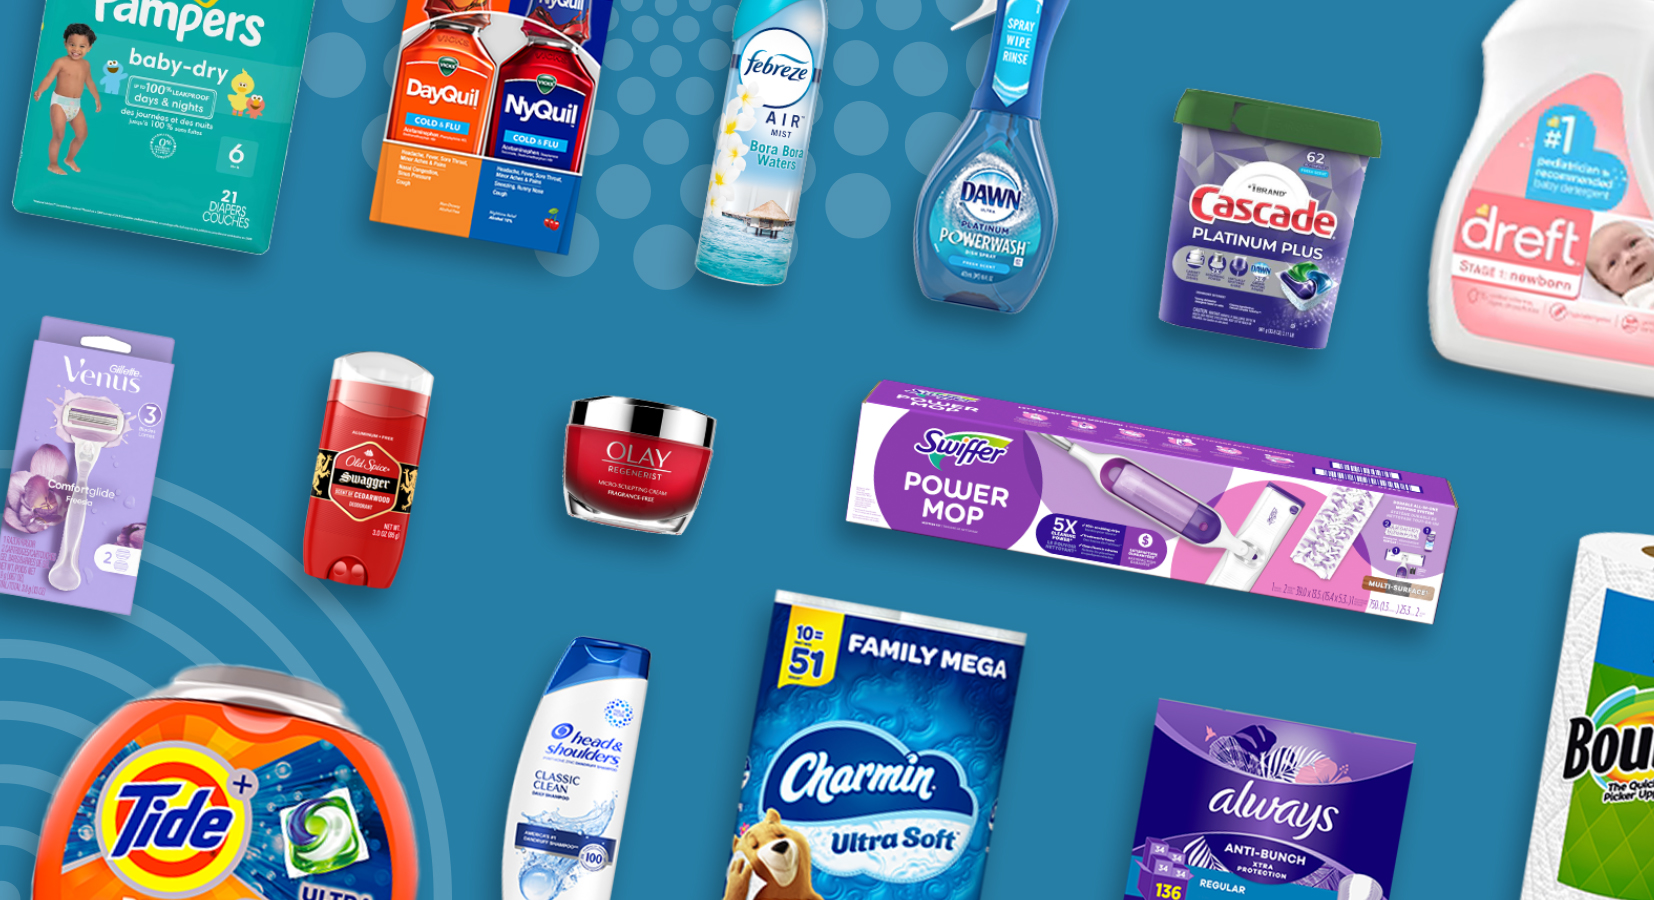 Five P&G Products Comprise List of the Top 31 Products of the Year